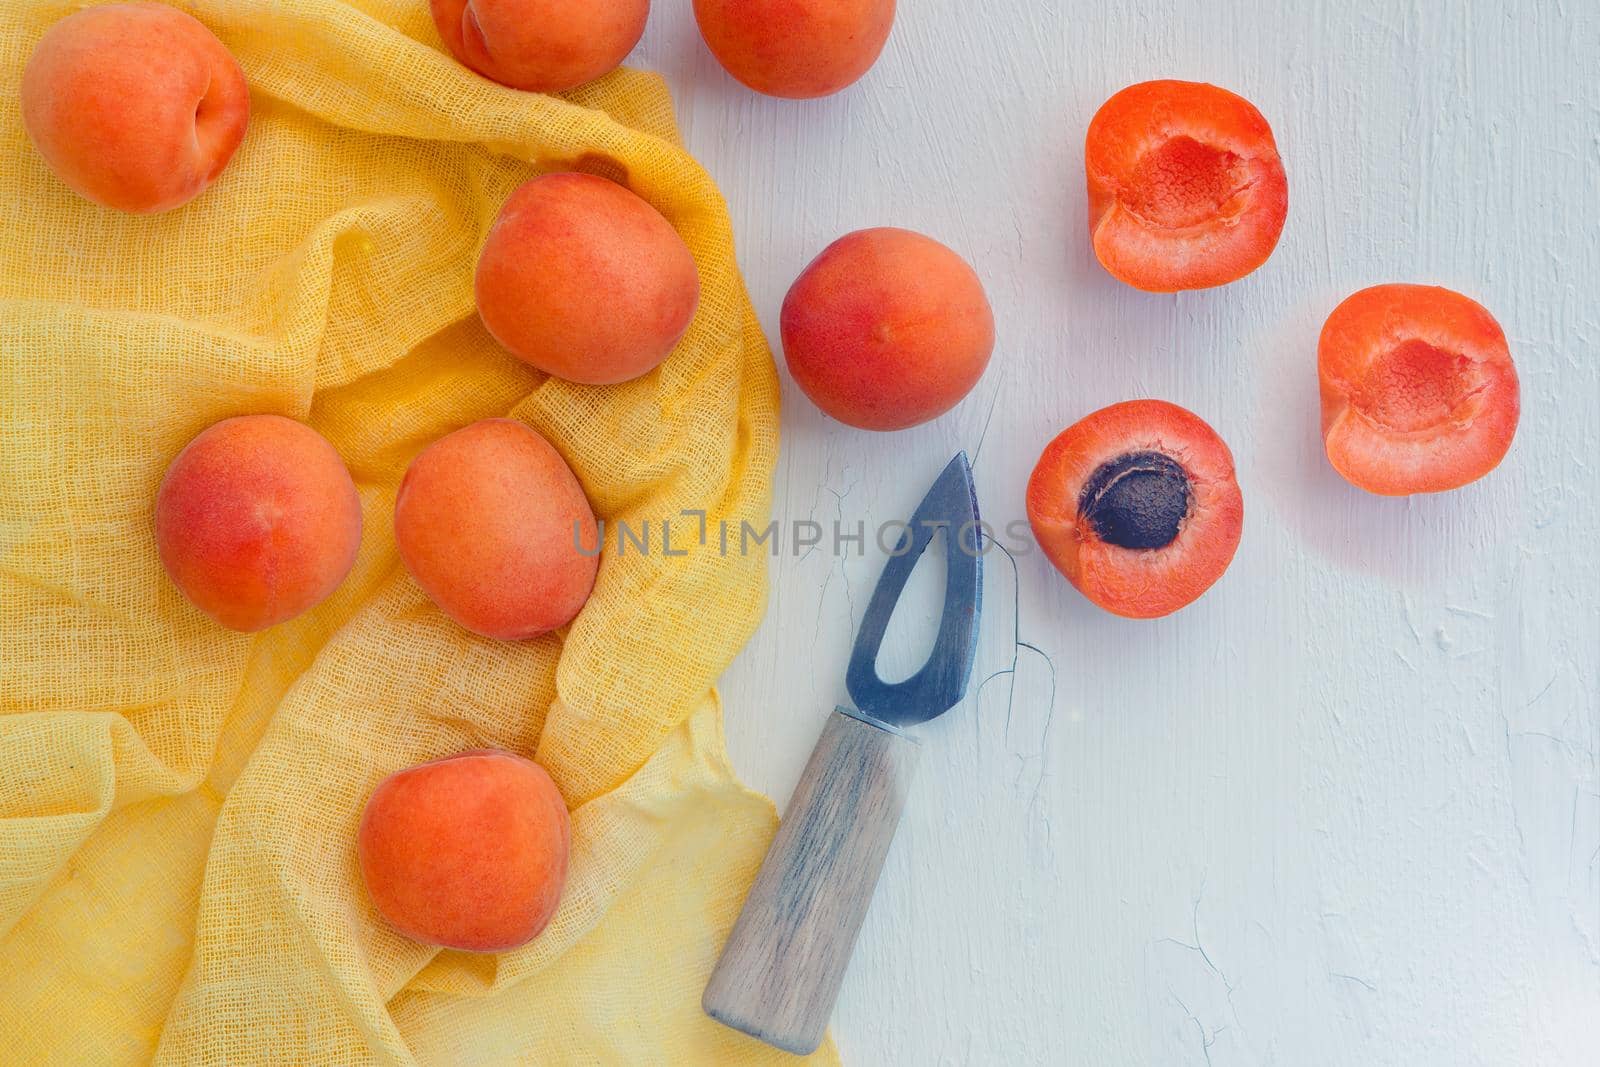 Delicious apricots with small knife on table close-up. Horizontal view from above with yellow napkin. space for text